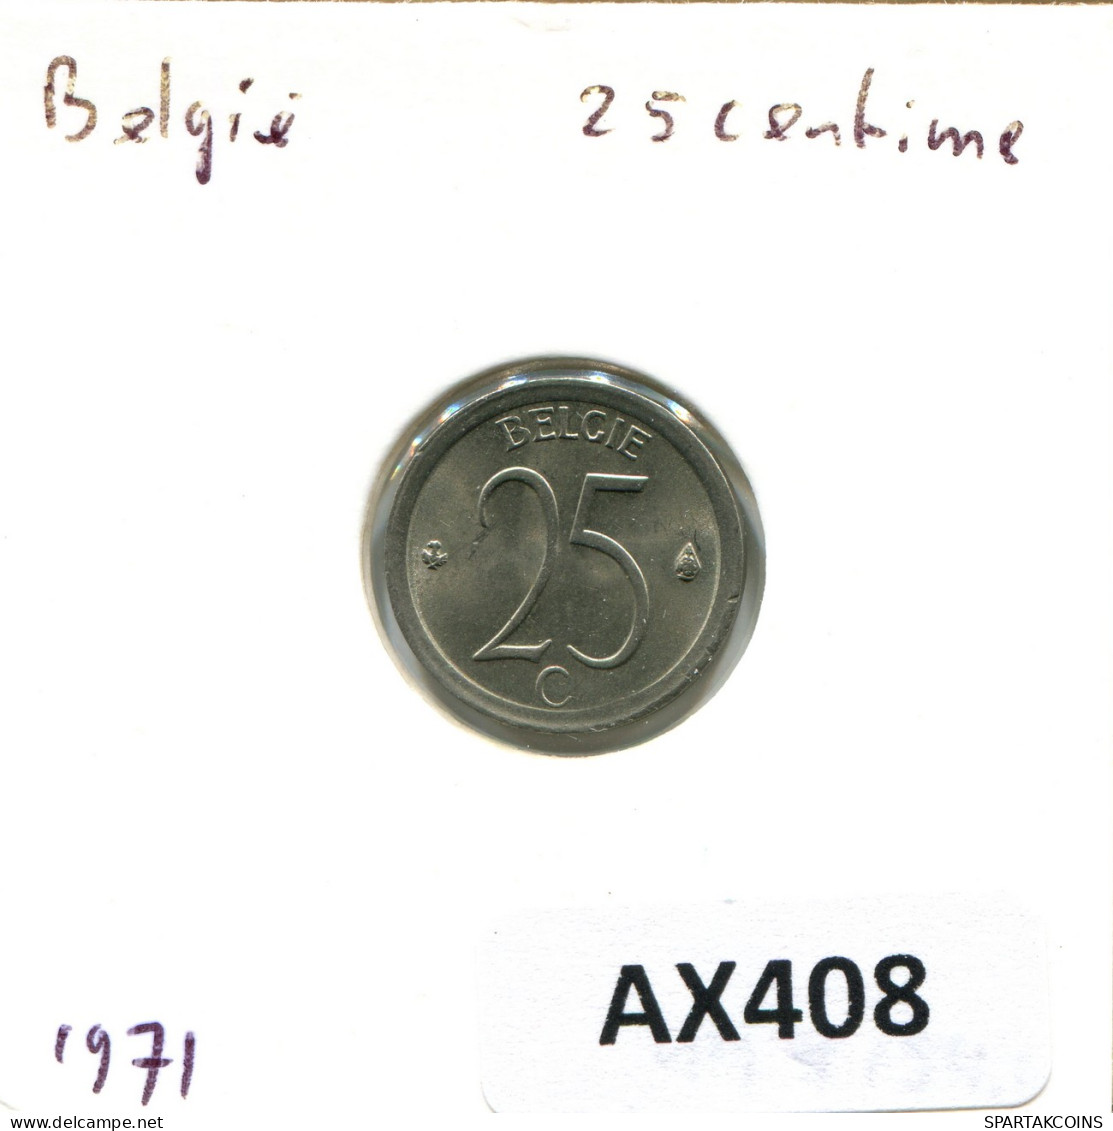 25 CENTIMES 1971 FRENCH Text BELGIUM Coin #AX408.U - 25 Centimes